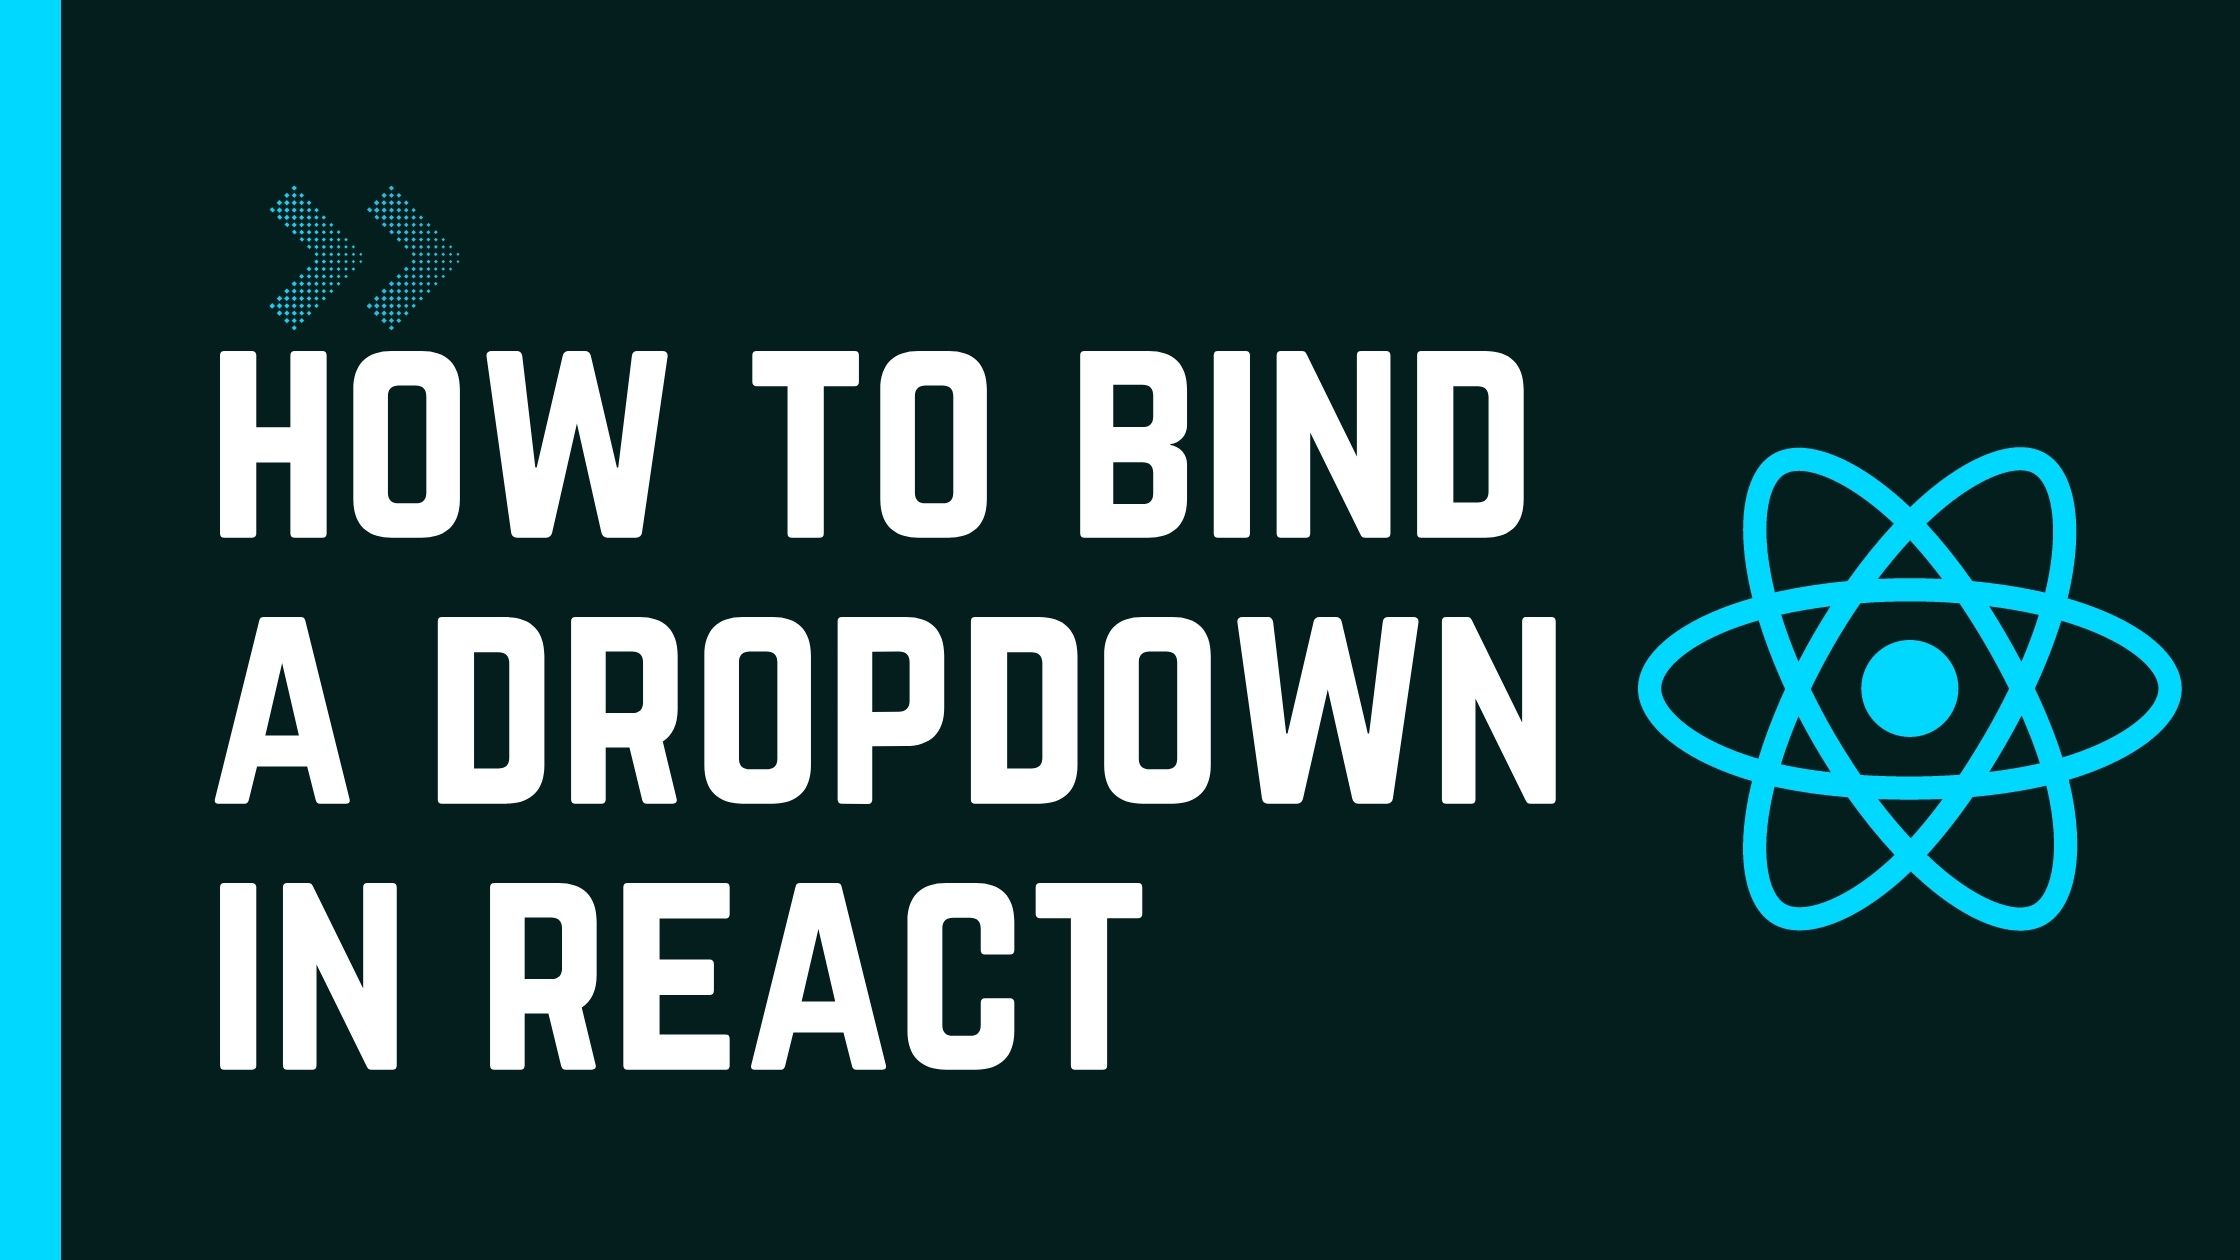 How to bind a dropdown dynamically using React